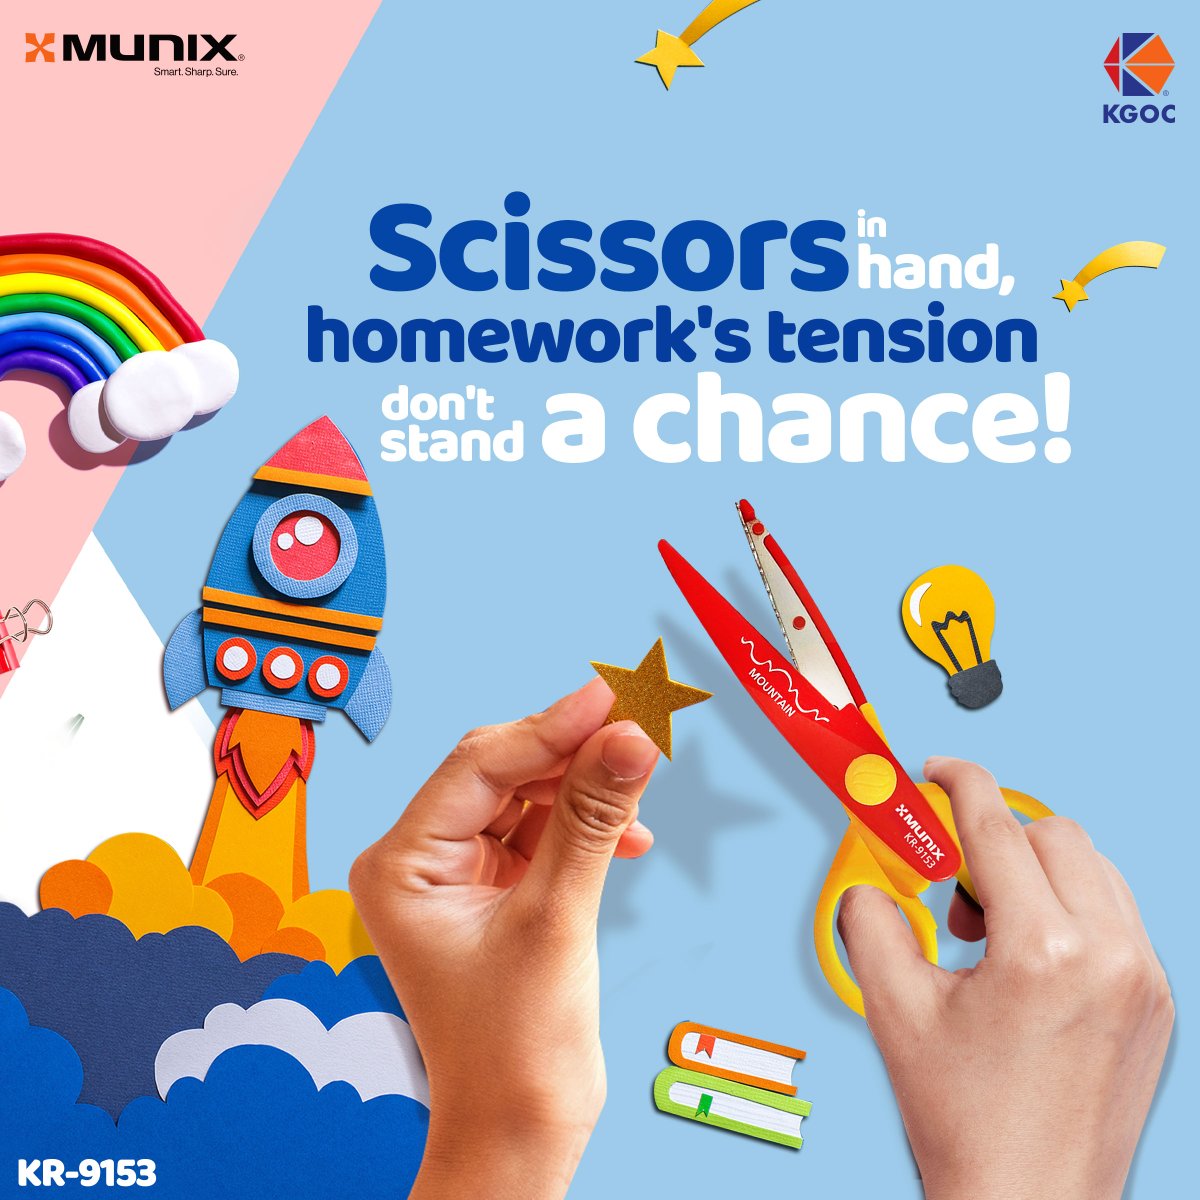 Time to snip away those assignments and conquer the day! #HomeworkWarrior #ScissorsReady #munix #kgoc